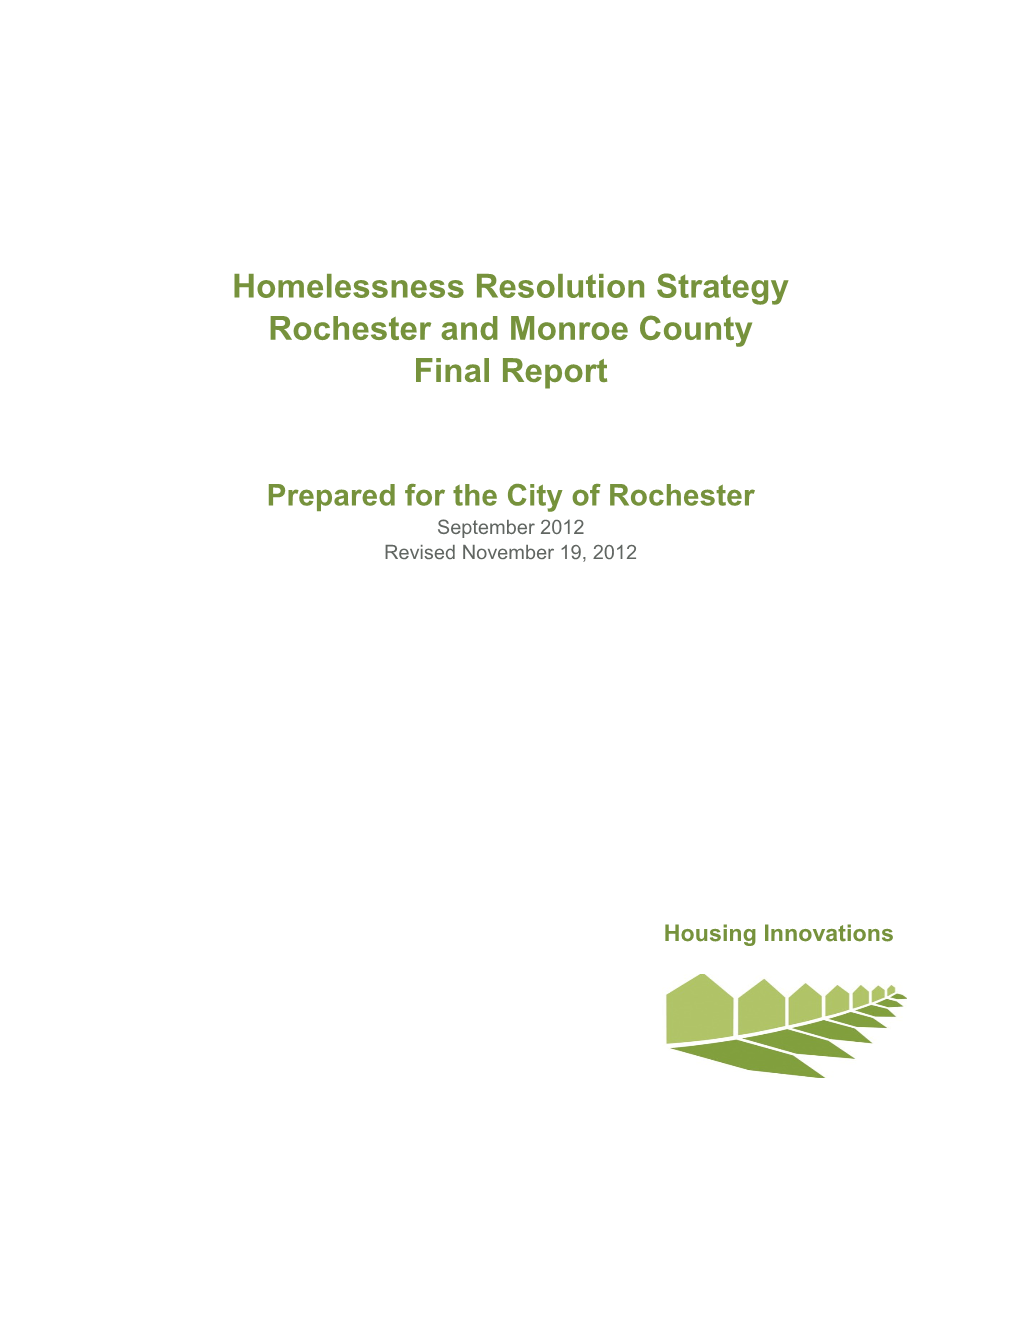 Rochester Homelessness Resolution Strategy